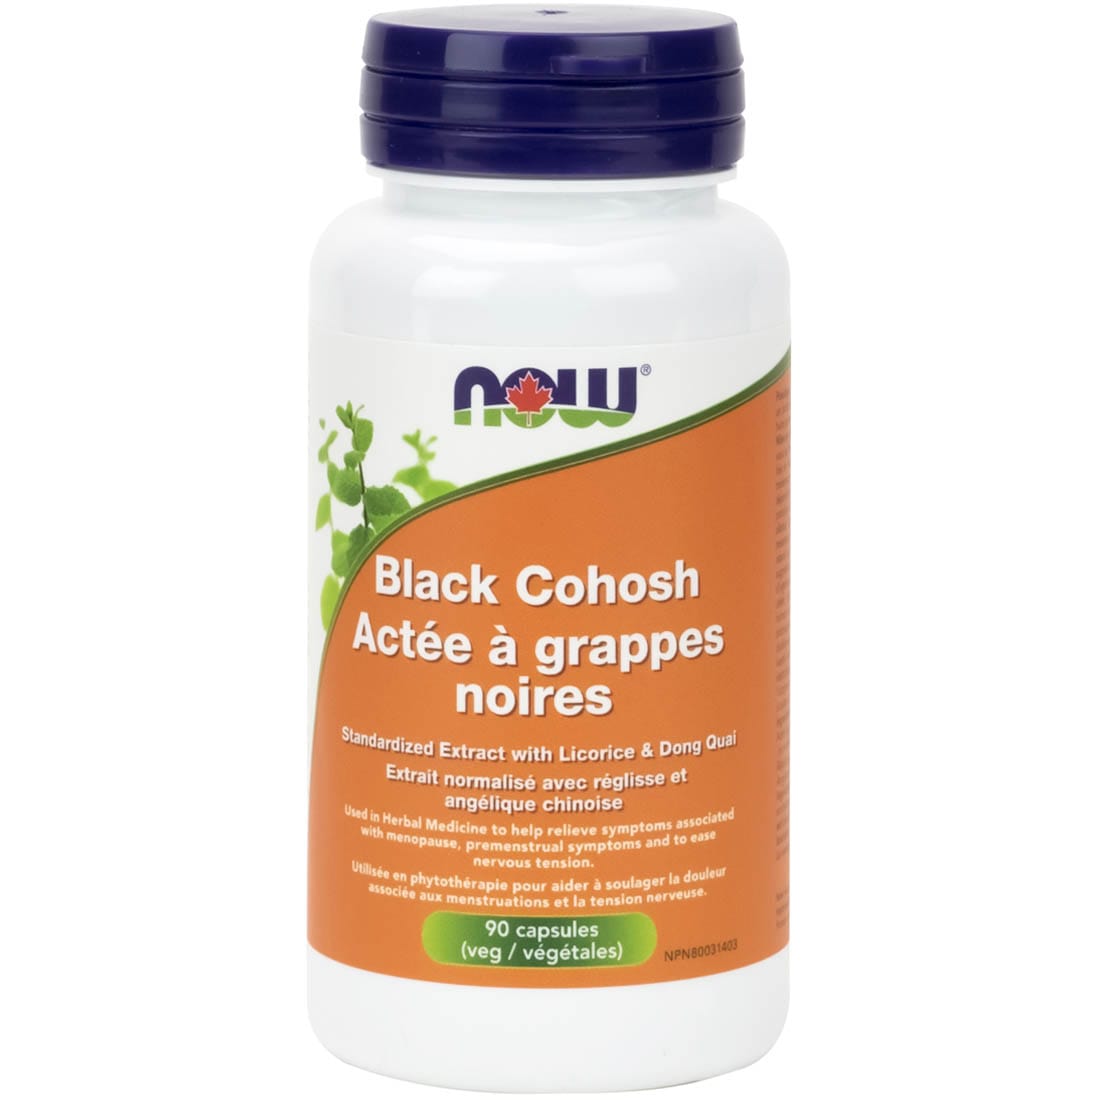 NOW Black Cohosh 80mg Standardized Extract 2.5% with Licorice and Dong Quai, 90 Capsules